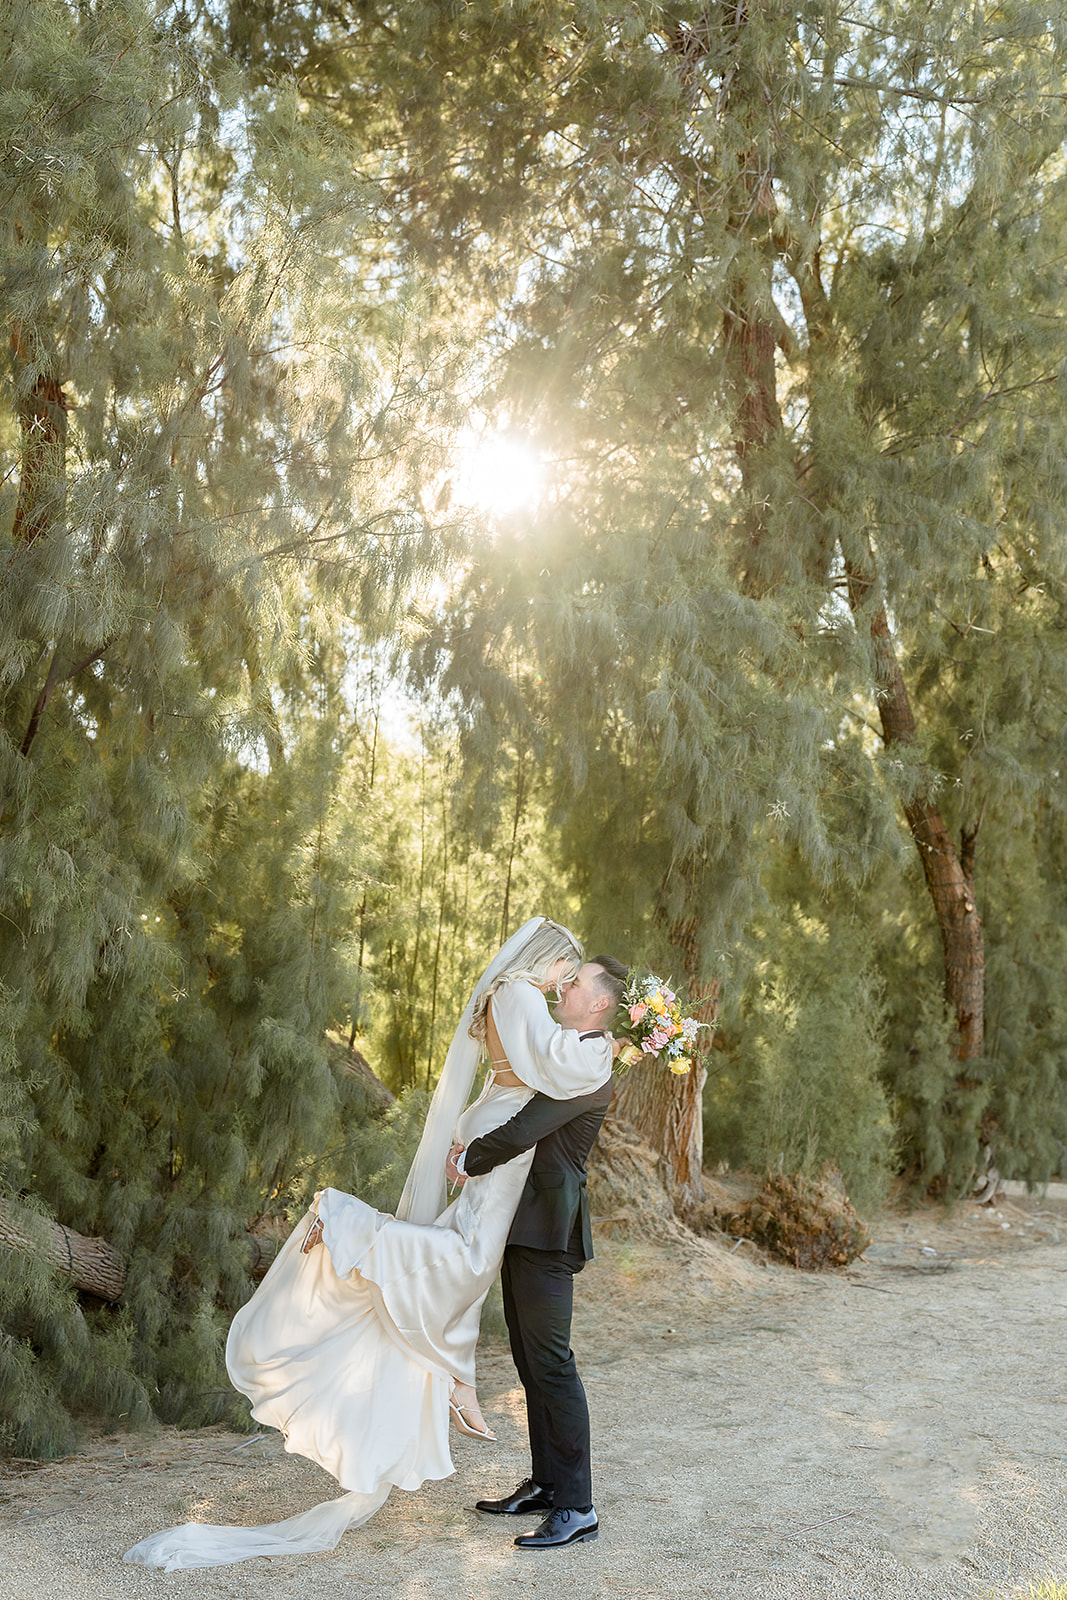 Groom lifts bride up during their wedding shoot at GreenGale Farms arranged by Elopement Las Vegas